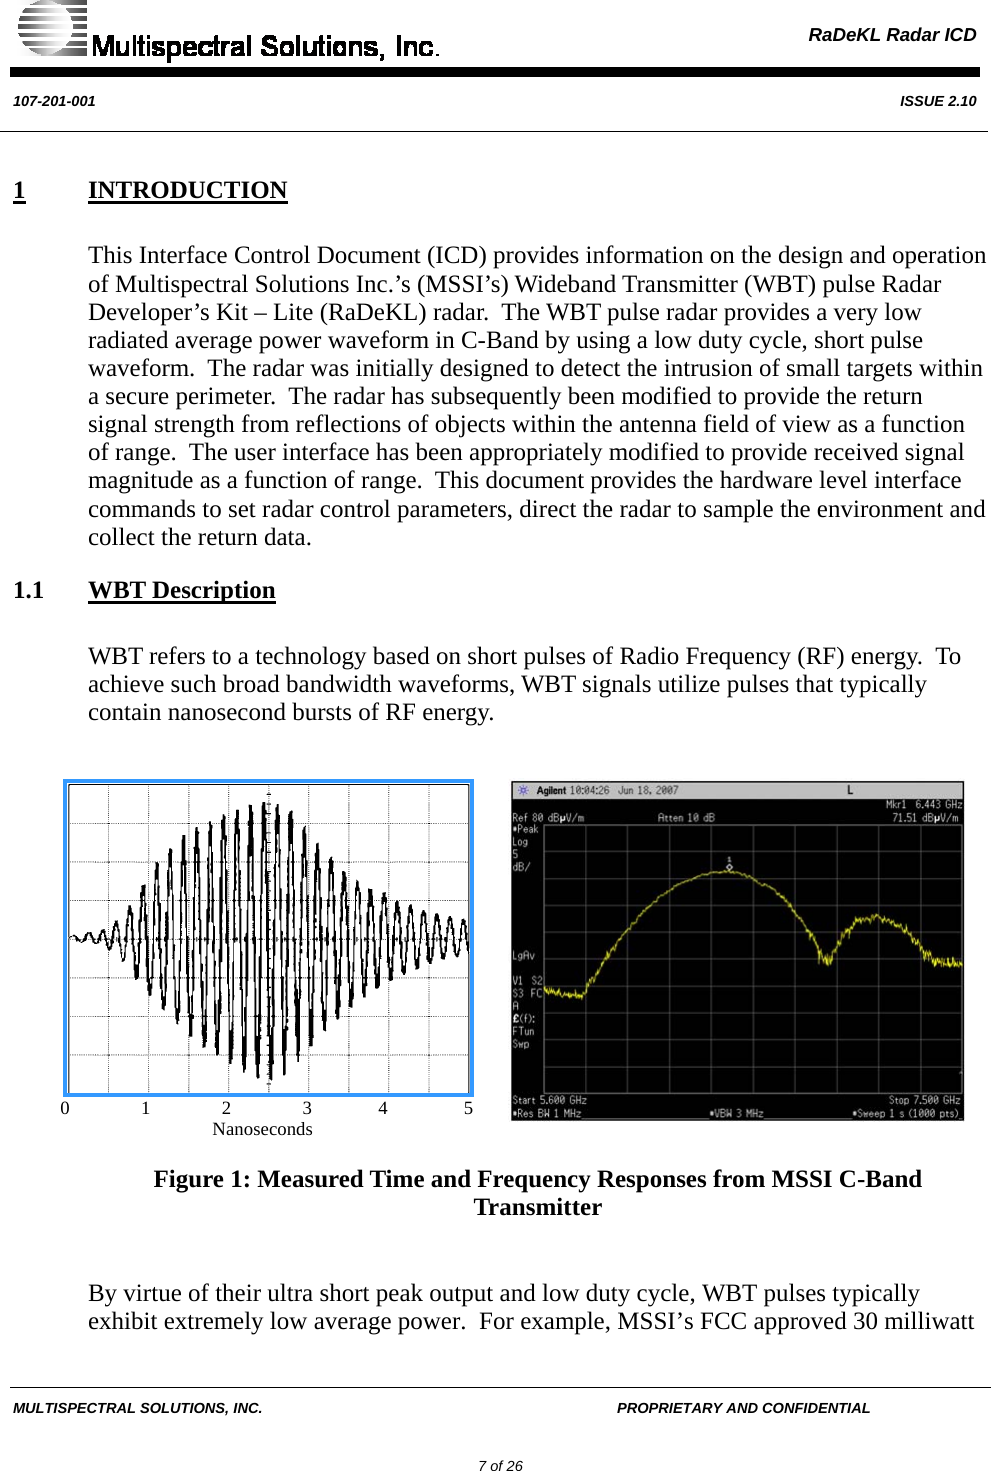  RaDeKL Radar ICD  107-201-001  ISSUE 2.10  MULTISPECTRAL SOLUTIONS, INC.       PROPRIETARY AND CONFIDENTIAL         7 of 26 1 INTRODUCTION This Interface Control Document (ICD) provides information on the design and operation of Multispectral Solutions Inc.’s (MSSI’s) Wideband Transmitter (WBT) pulse Radar Developer’s Kit – Lite (RaDeKL) radar.  The WBT pulse radar provides a very low radiated average power waveform in C-Band by using a low duty cycle, short pulse waveform.  The radar was initially designed to detect the intrusion of small targets within a secure perimeter.  The radar has subsequently been modified to provide the return signal strength from reflections of objects within the antenna field of view as a function of range.  The user interface has been appropriately modified to provide received signal magnitude as a function of range.  This document provides the hardware level interface commands to set radar control parameters, direct the radar to sample the environment and collect the return data. 1.1 WBT Description WBT refers to a technology based on short pulses of Radio Frequency (RF) energy.  To achieve such broad bandwidth waveforms, WBT signals utilize pulses that typically contain nanosecond bursts of RF energy.                            0               1               2               3              4                5                                           Nanoseconds Figure 1: Measured Time and Frequency Responses from MSSI C-Band Transmitter  By virtue of their ultra short peak output and low duty cycle, WBT pulses typically exhibit extremely low average power.  For example, MSSI’s FCC approved 30 milliwatt 